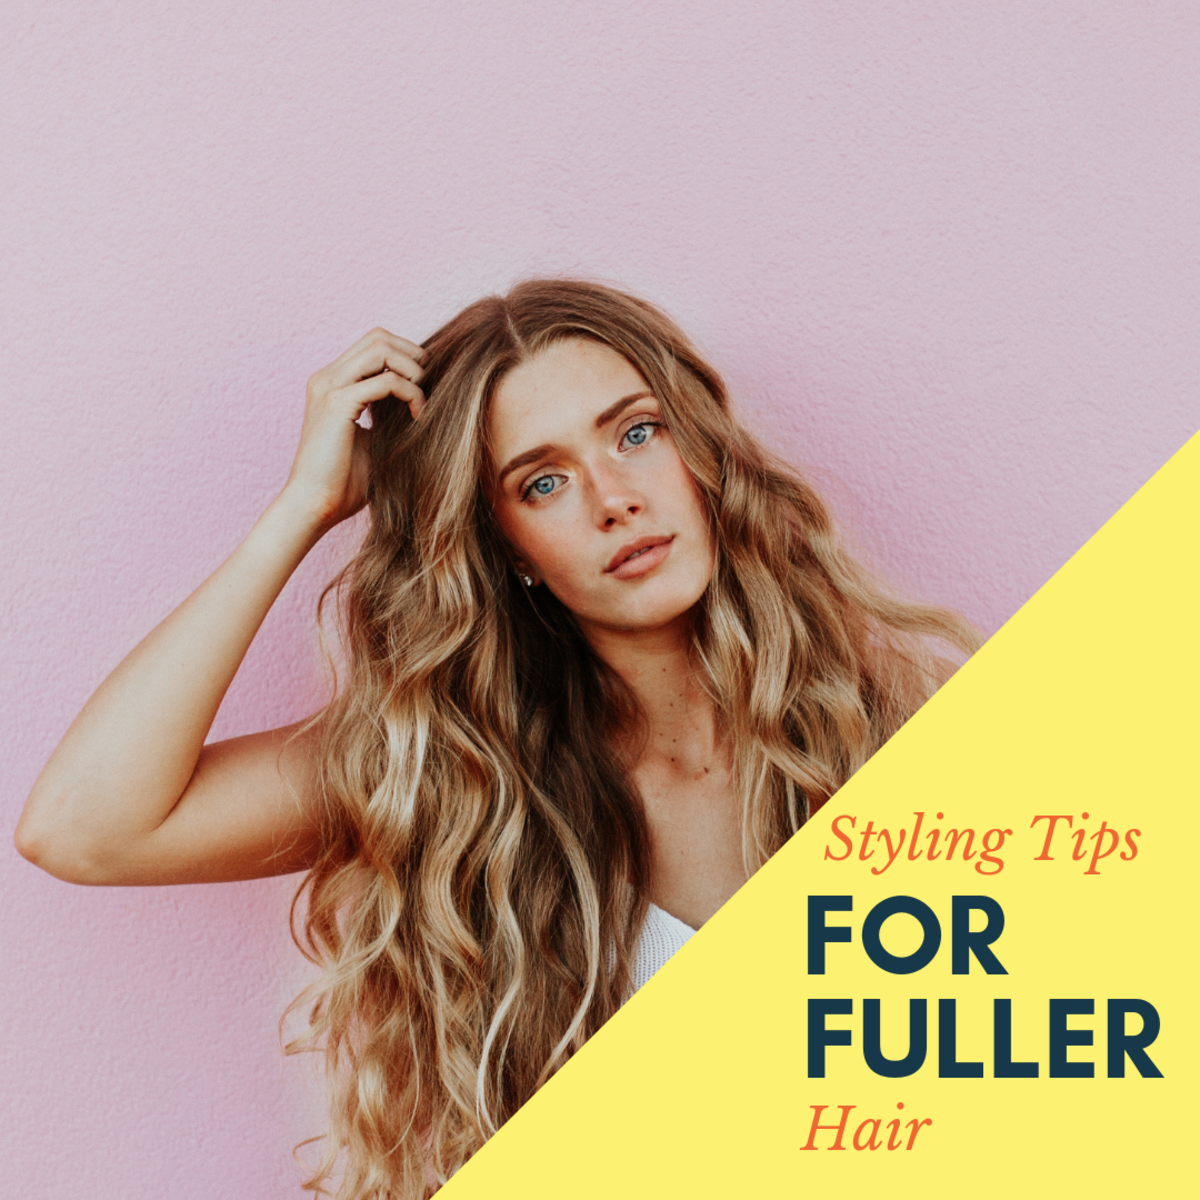 How to Thicken Fine or Thin Hair - Bellatory